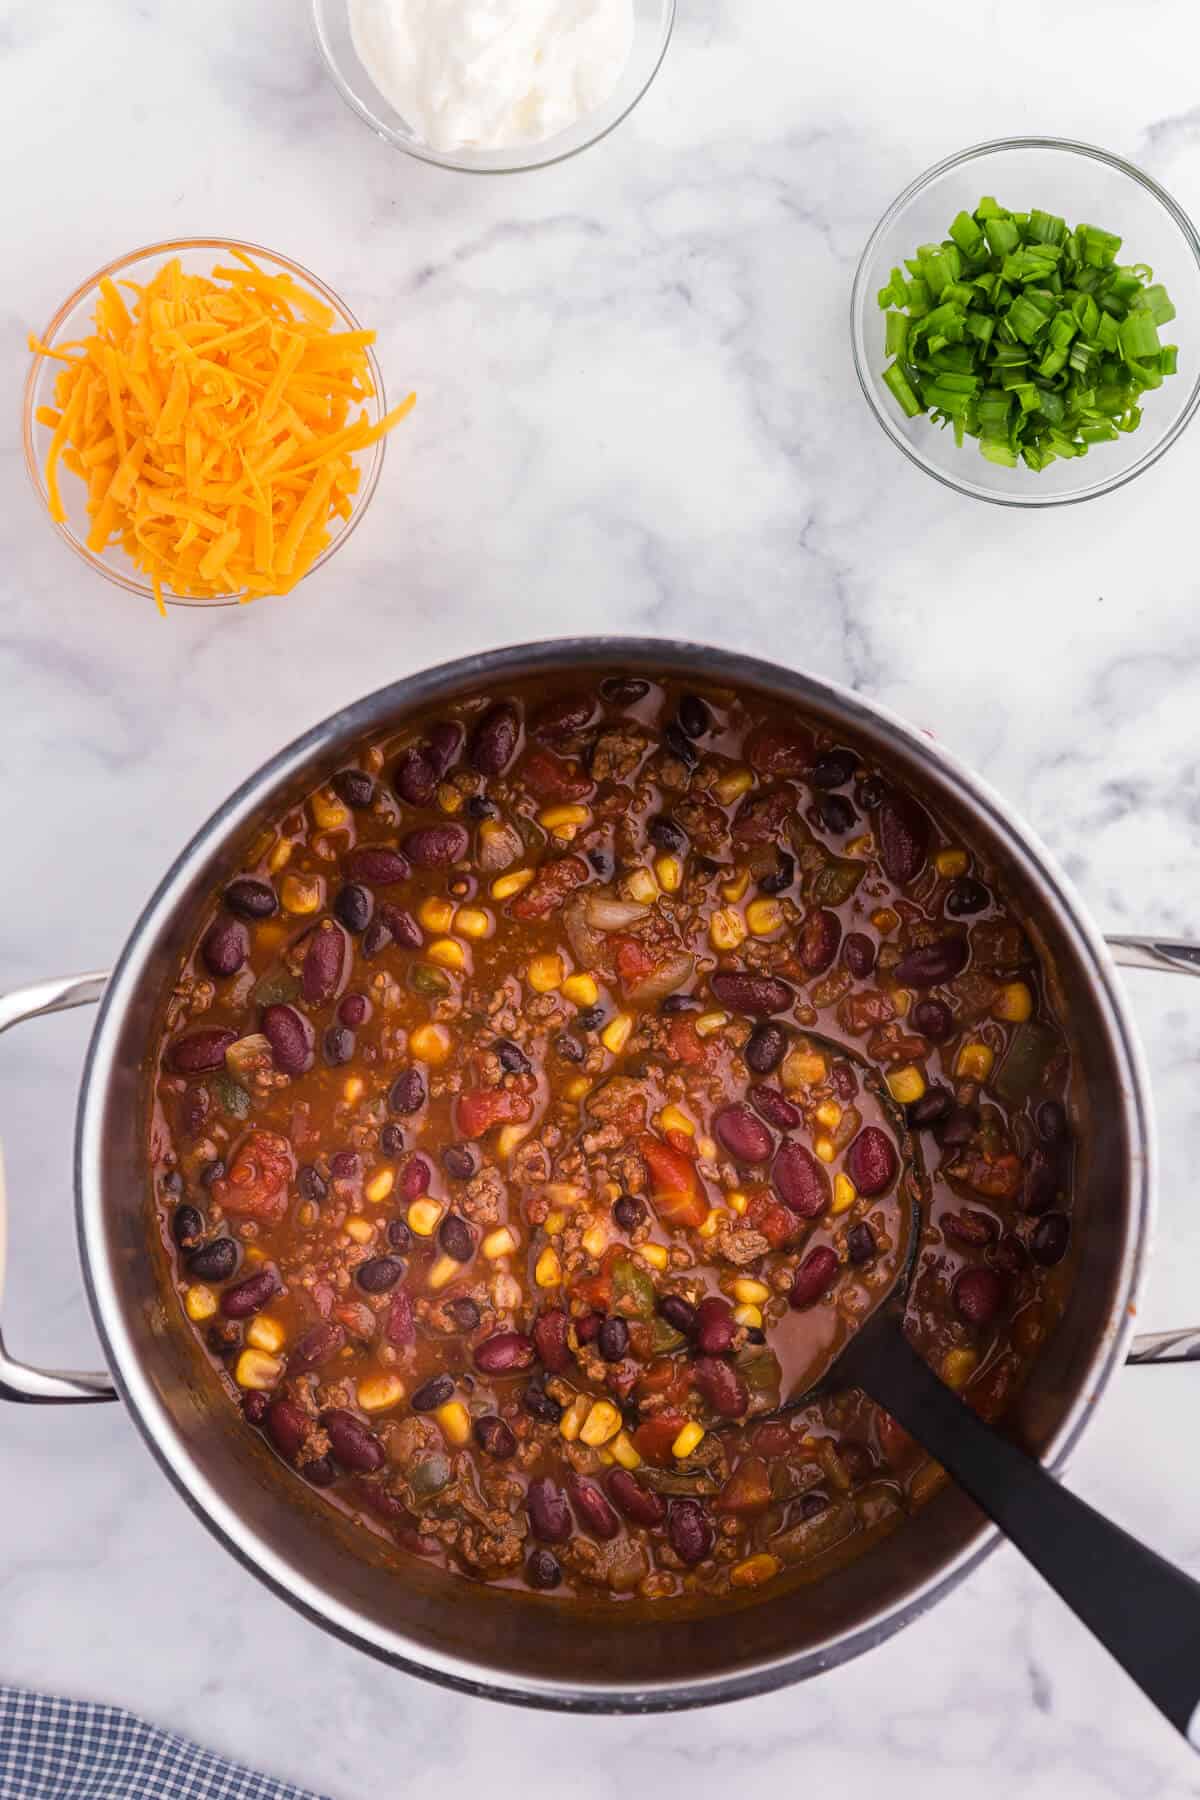 Pantry Chili - A simple, hearty soup made with just pantry staples! This beefy chili recipe is packed with corn, black beans, tomatoes, and kidney beans with a homemade seasoning blend for the best homemade chili recipe.